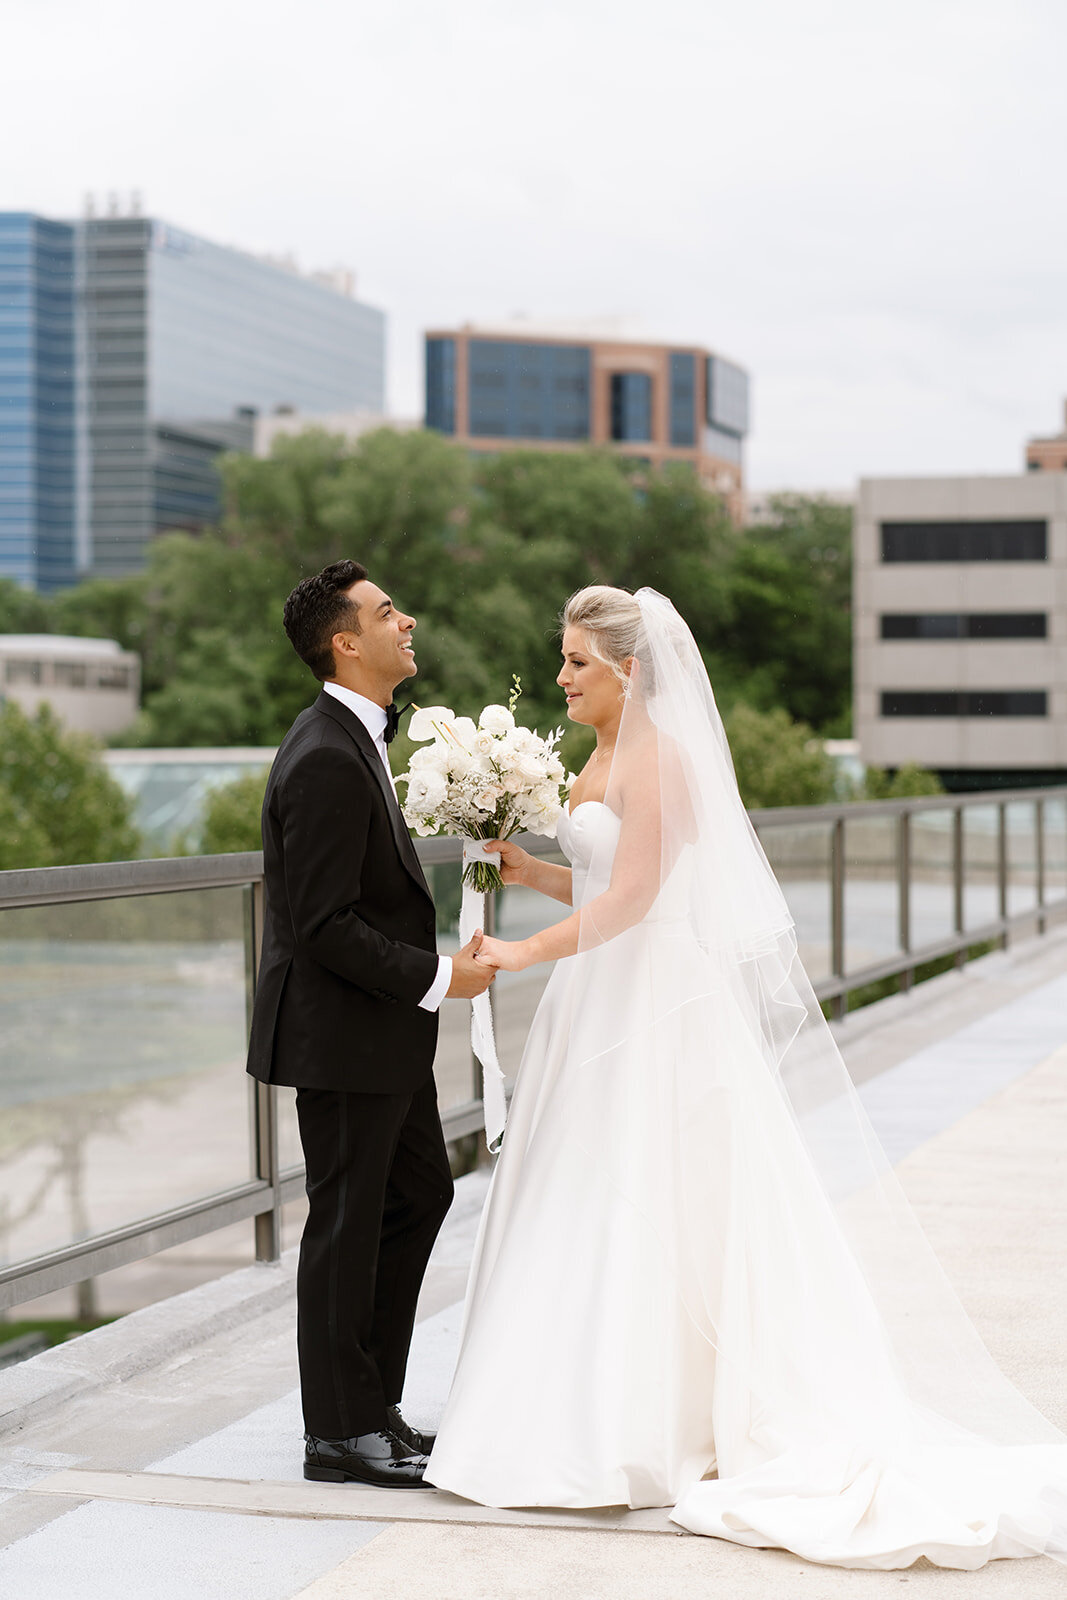 The Parks - The Gallery Event Space - Kansas City Wedding - Kansas City Wedding Photography - Nick and Lexie Photo Film-442